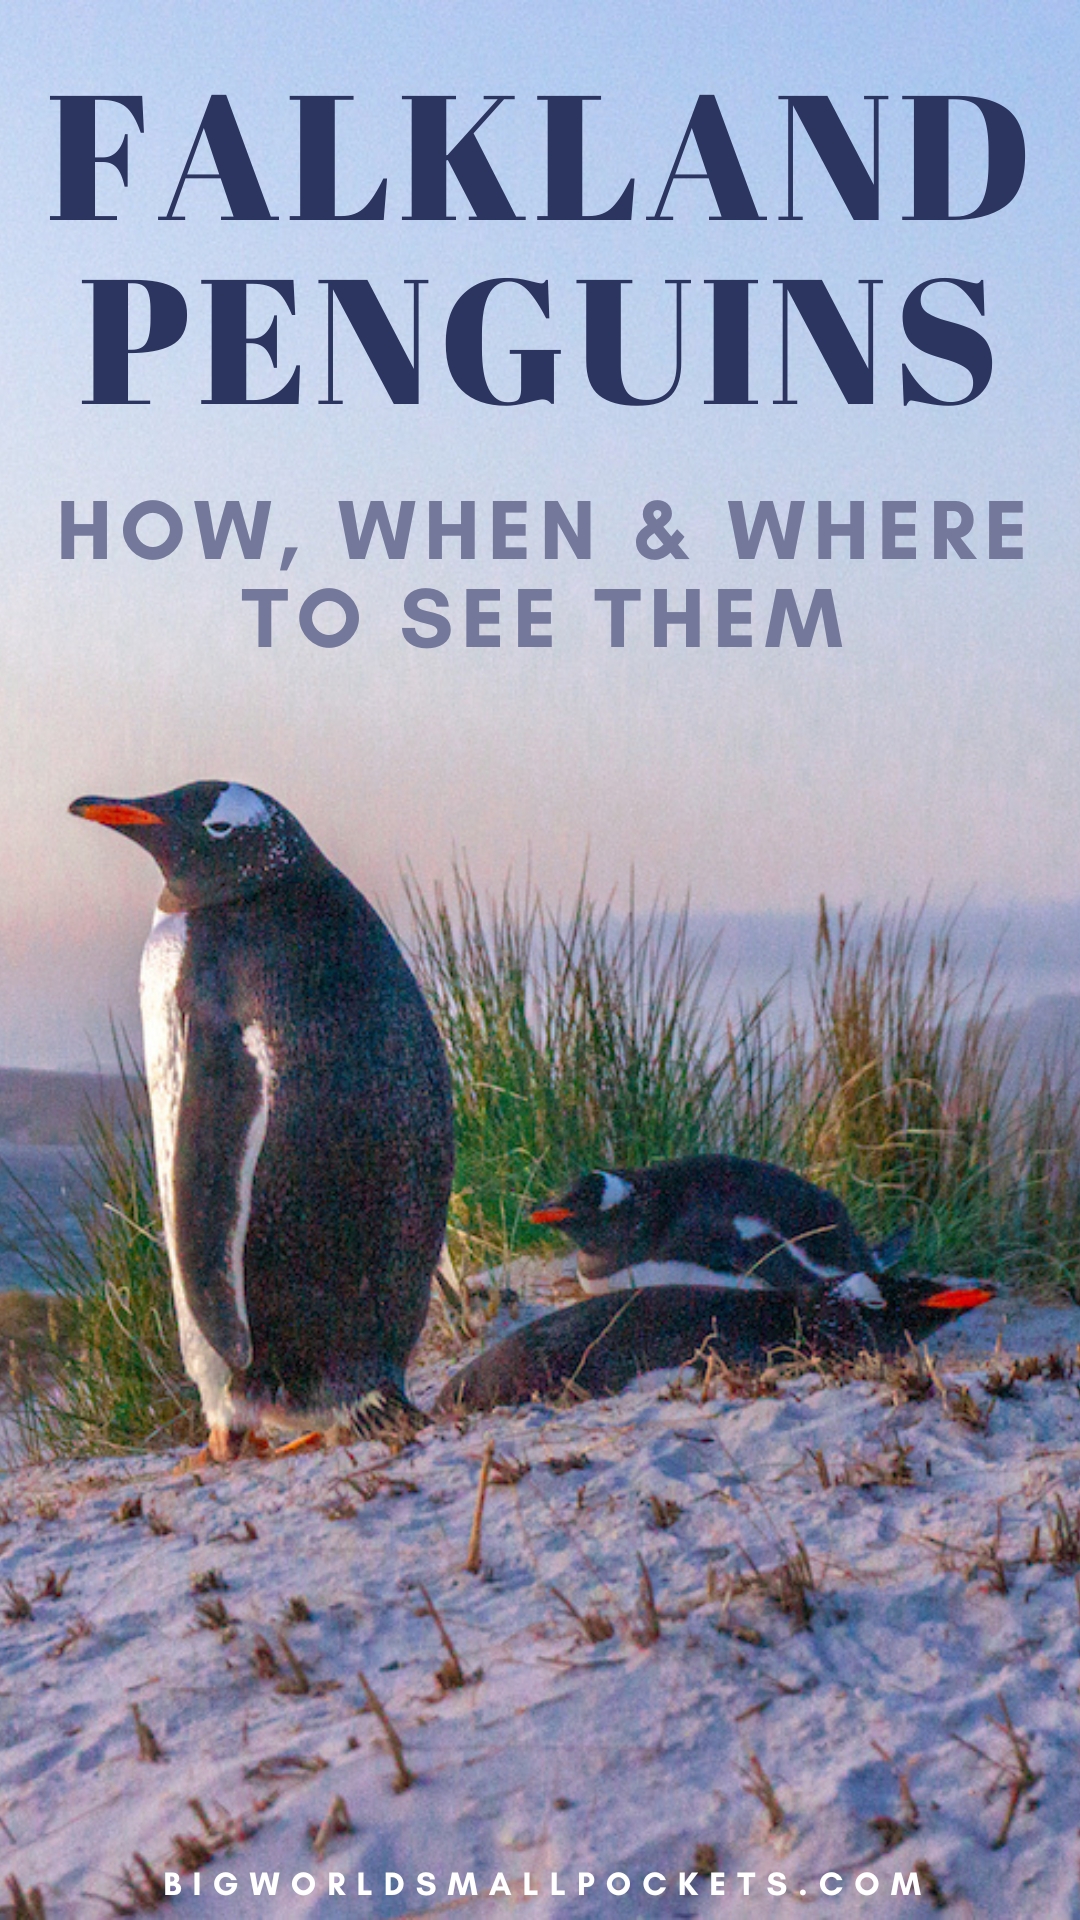 Falkland Penguins How, When and Where to See Them